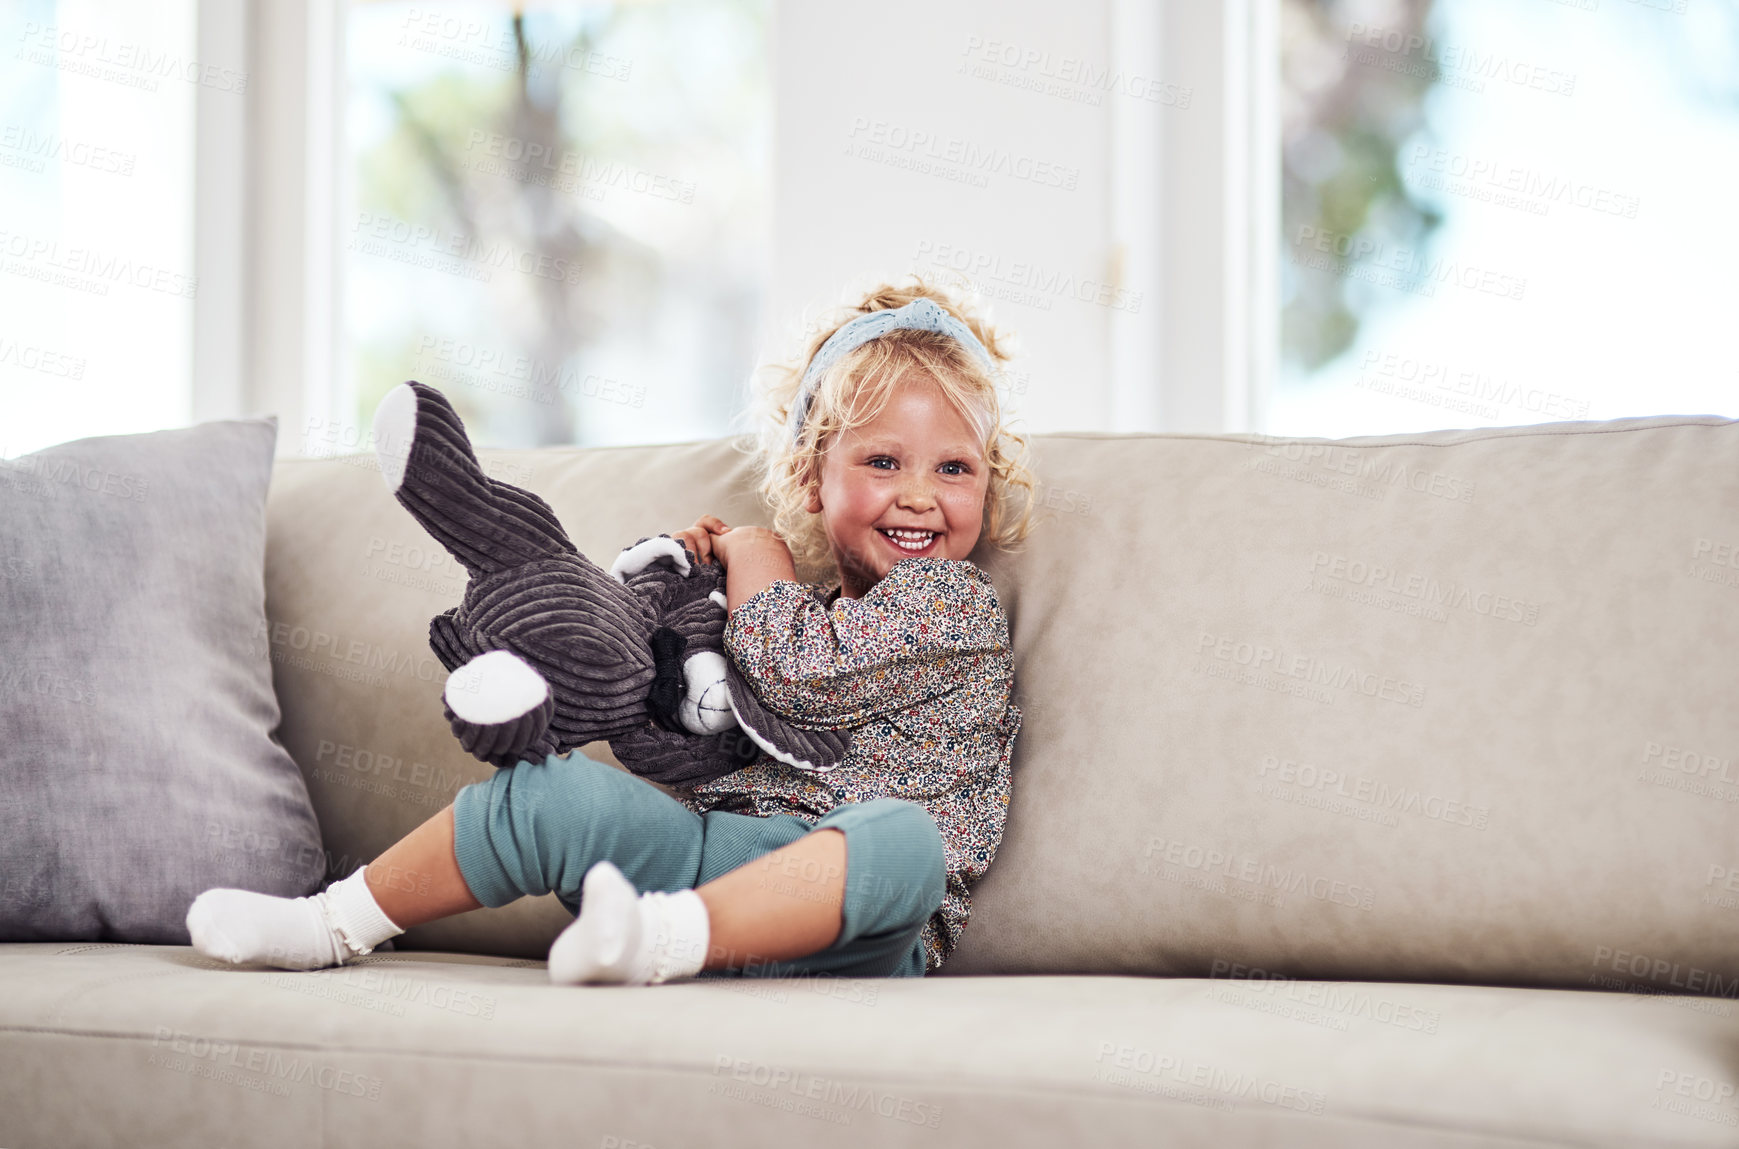 Buy stock photo Full length shot of an adorable little girl sitting alone on the sofa and playing with her toys at home